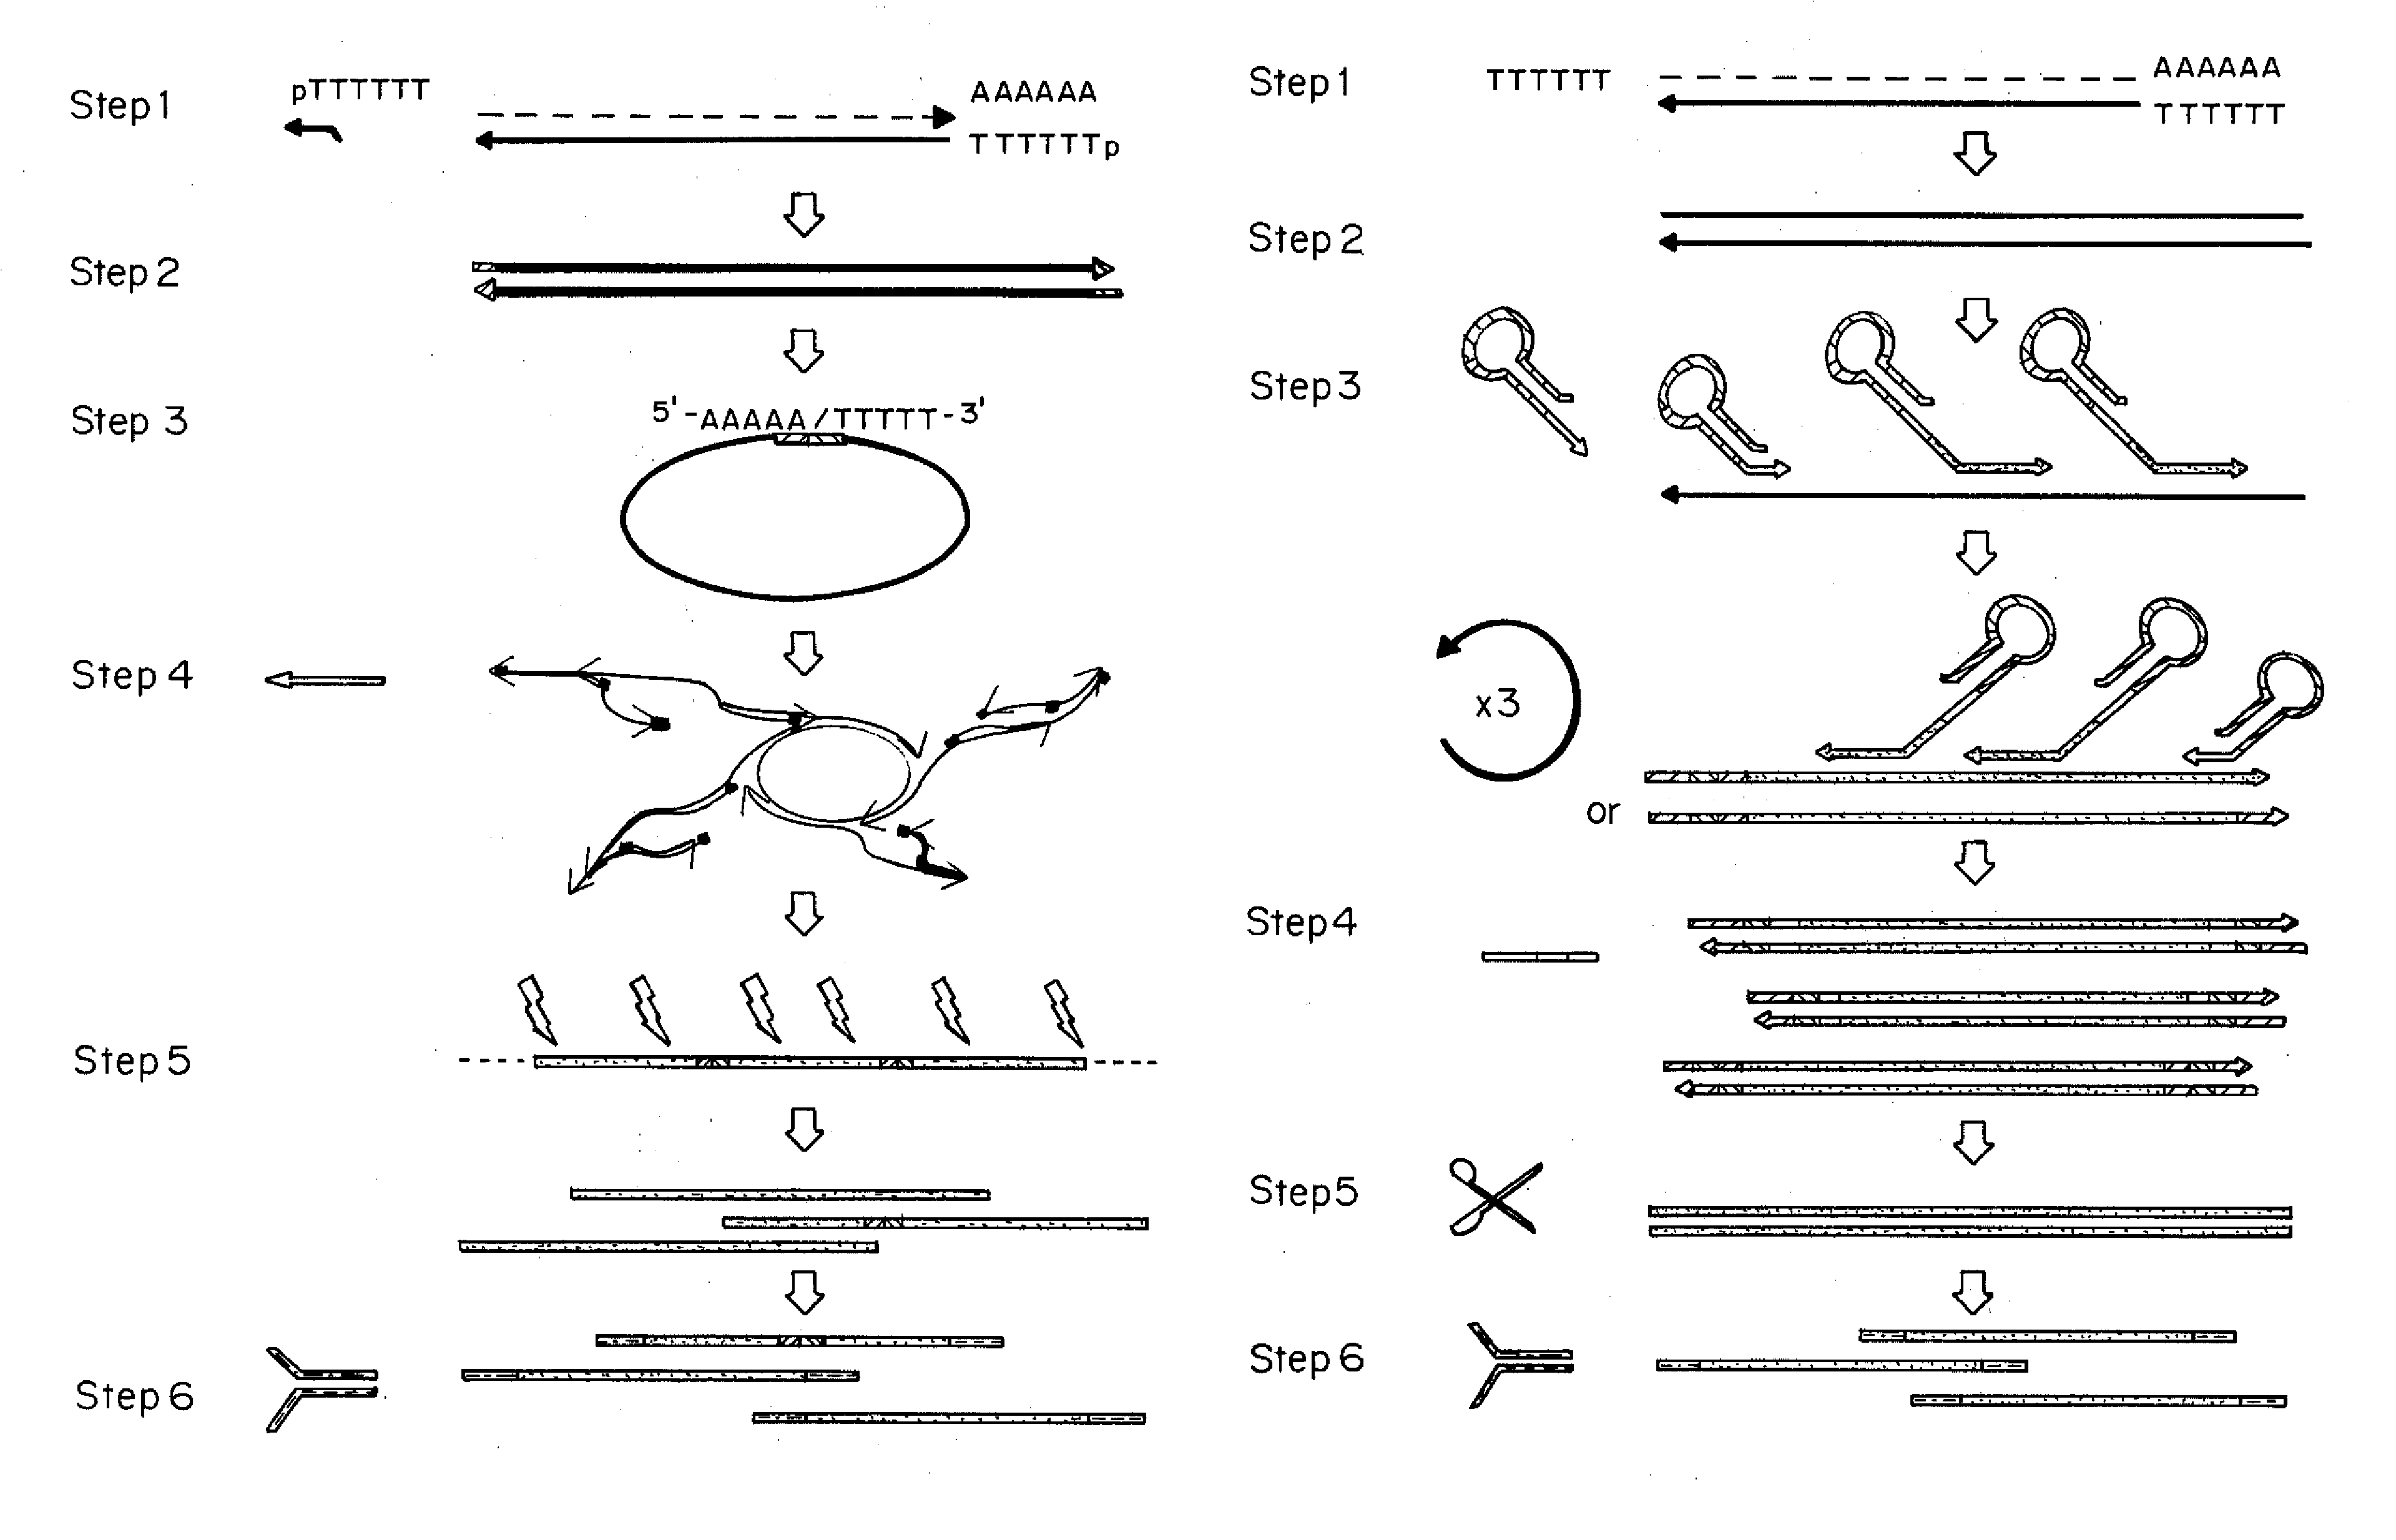 Methods For Preparing cDNA From Low Quantities of Cells